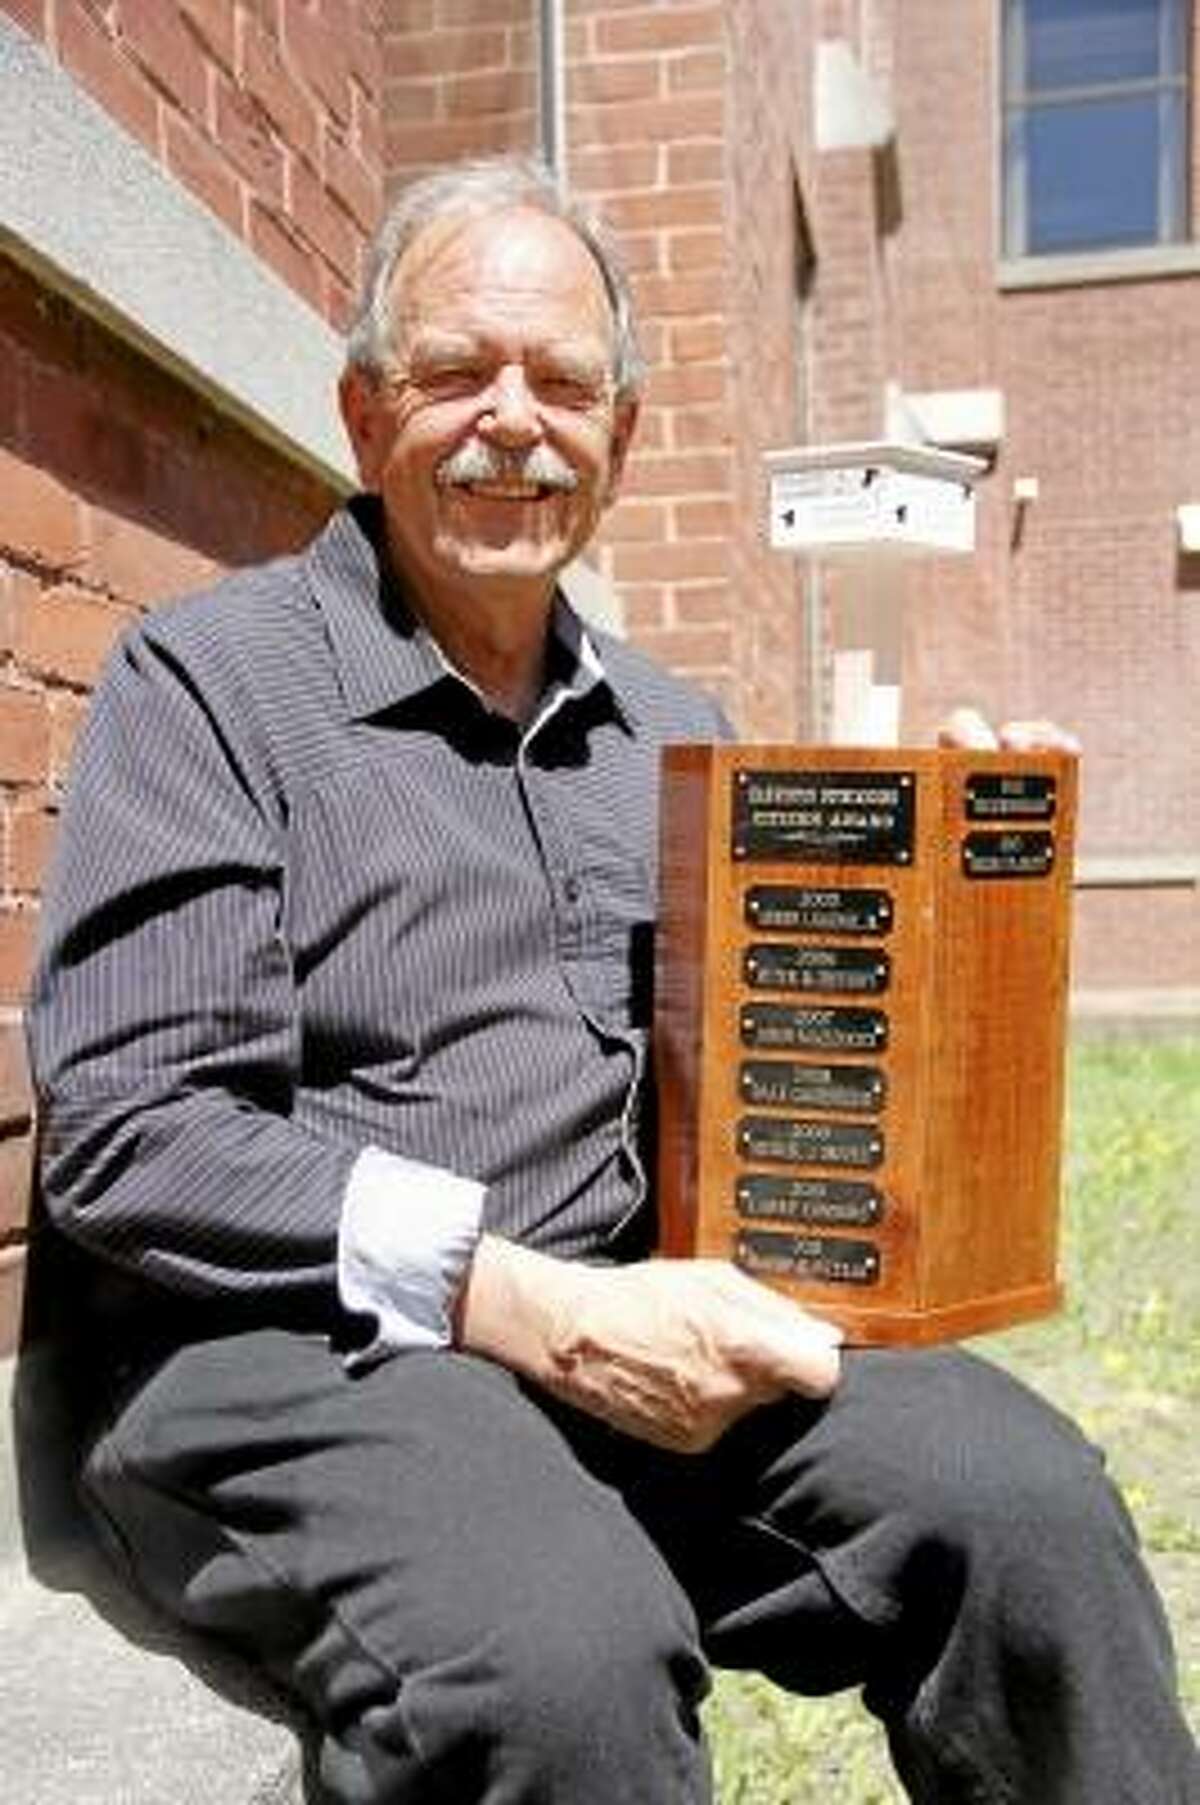 Roger P. Plaskett poses with the Harwinton Outstanding Citizen Award on Wednesday, May 1, 2013 in Torrington. Plaskett was named the 2013 recipient of the award in February, and had a banquet in his honor on April 26. The award is hand-crafted from Harwinton cherry wood and was designed by 2010 winner Larry Connors. It's the second incarnation of the award after the first one, which was first handed in 1975, filled up. (ESTEBAN L. HERNANDEZ/REGISTER CITIZEN)